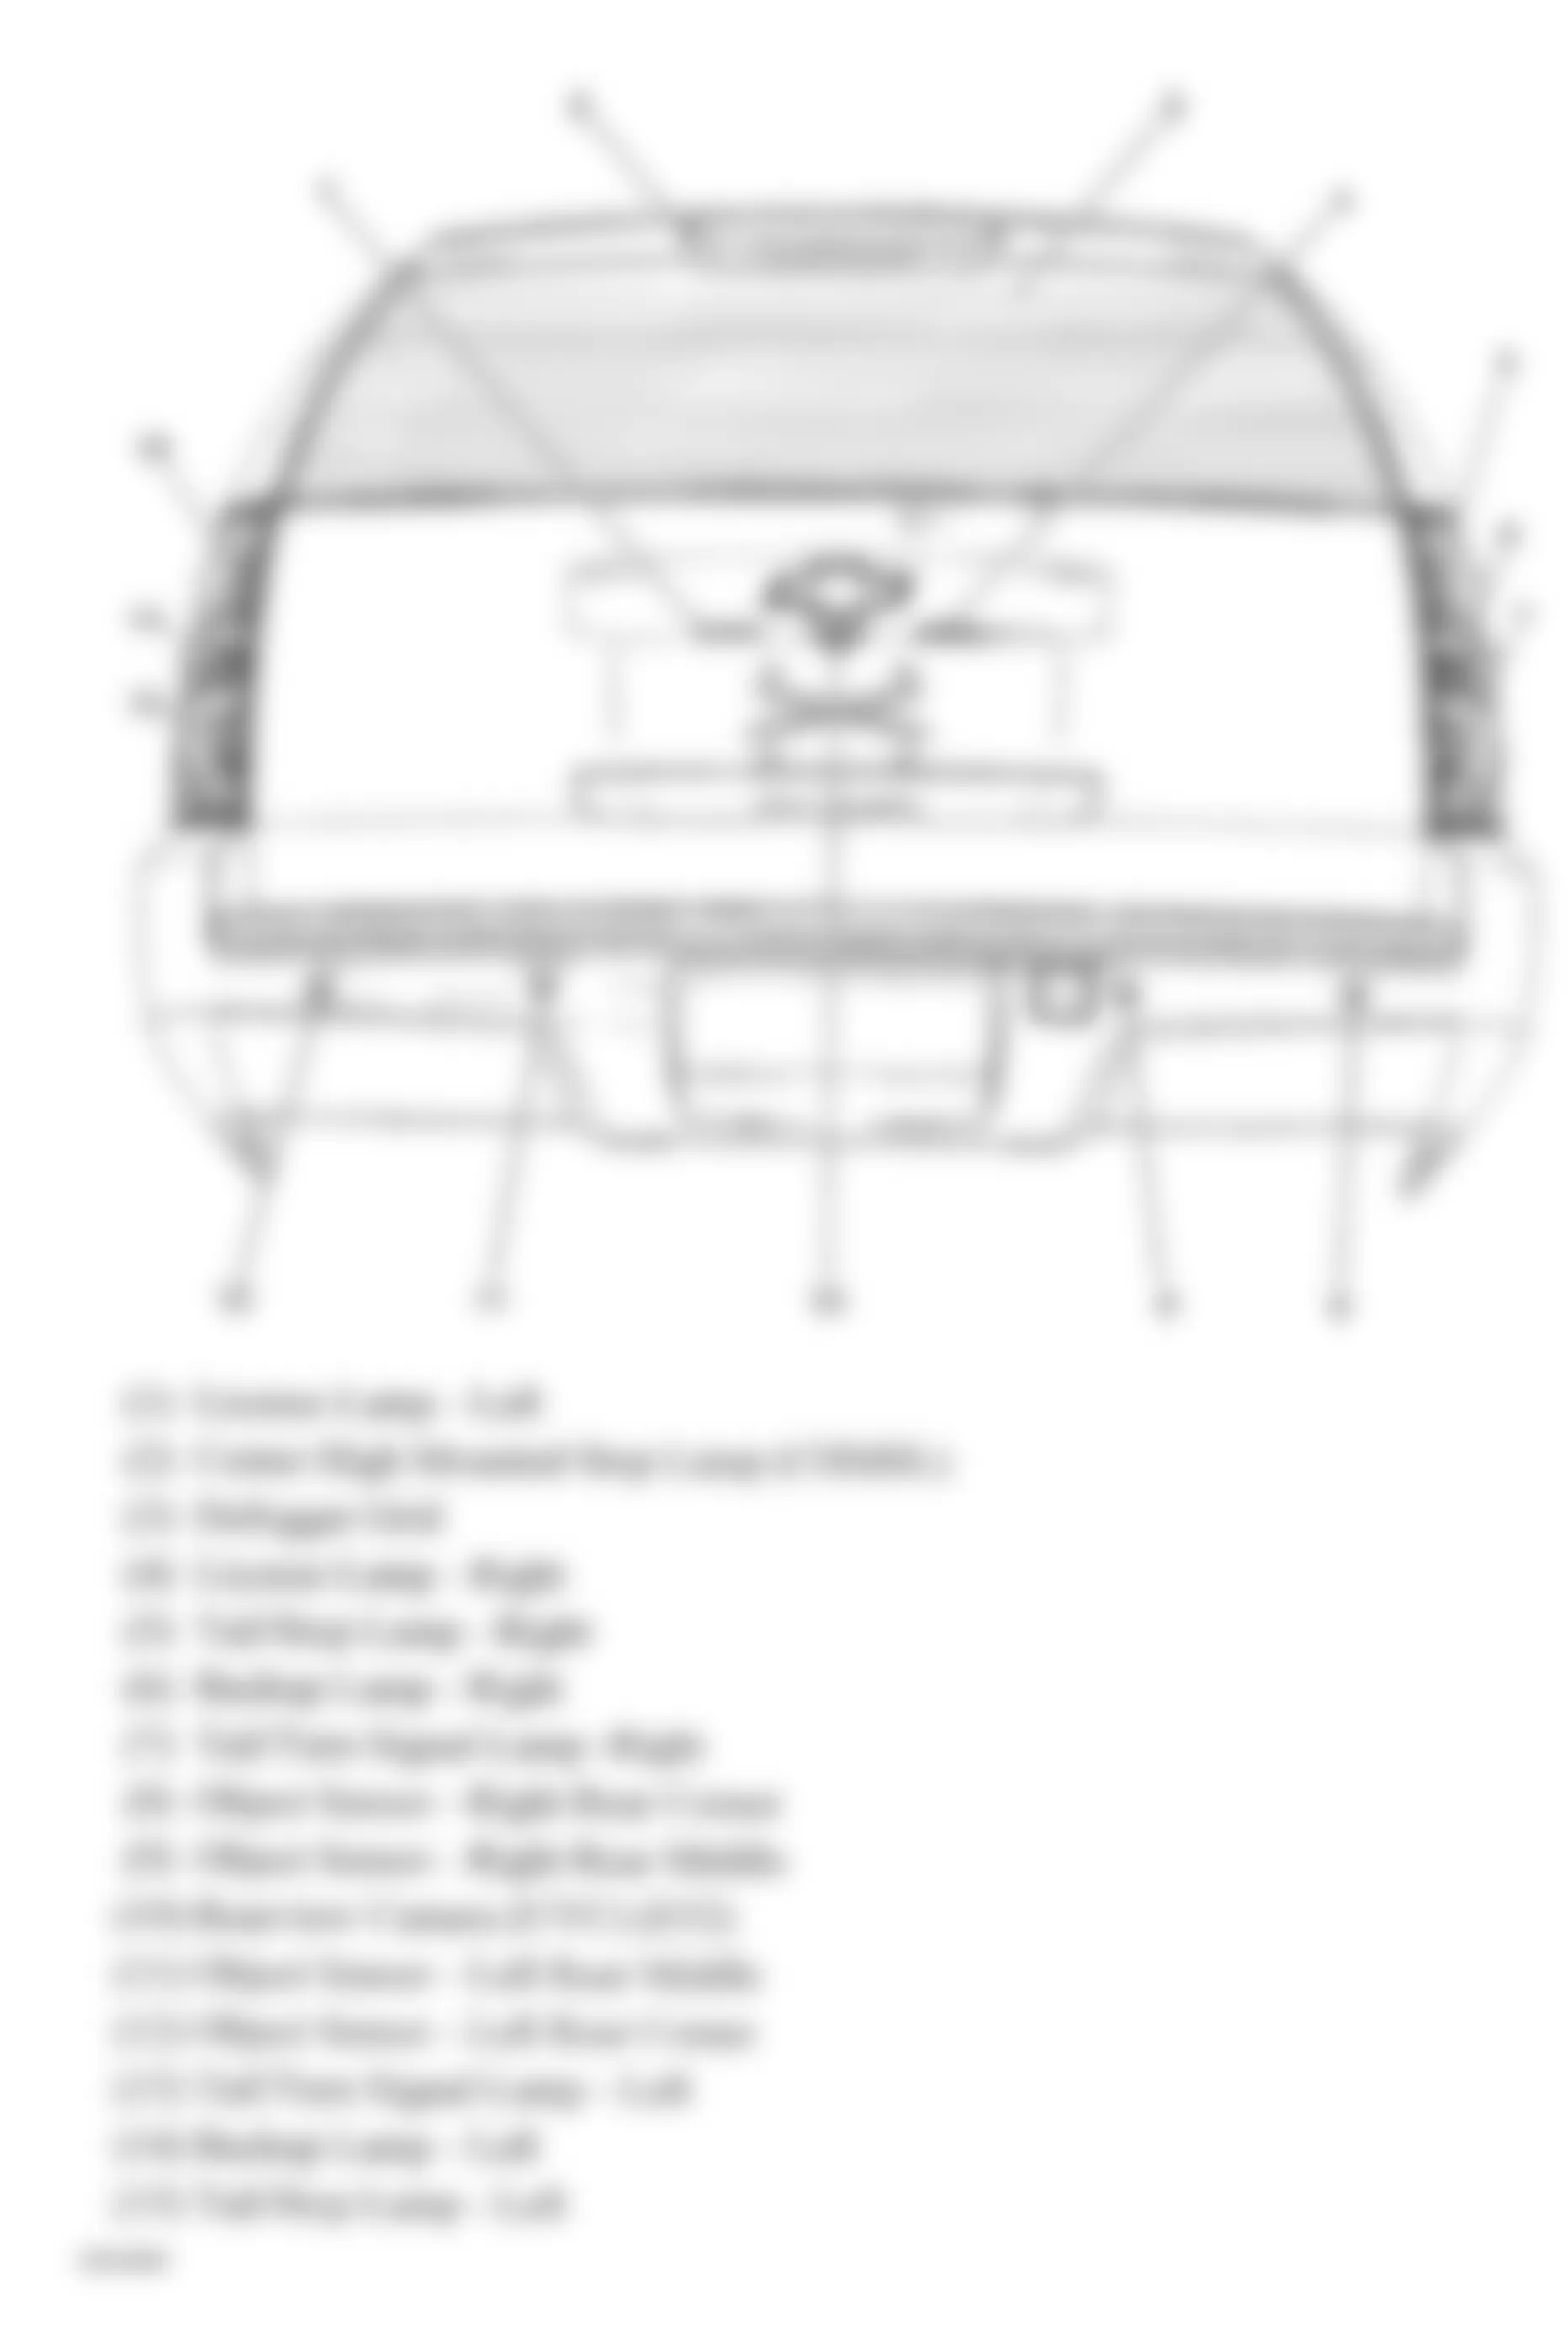 Chevrolet Suburban C1500 2009 - Component Locations -  Rear Of Vehicle (Avalanche, Suburban & Tahoe W/One Piece Liftgate)